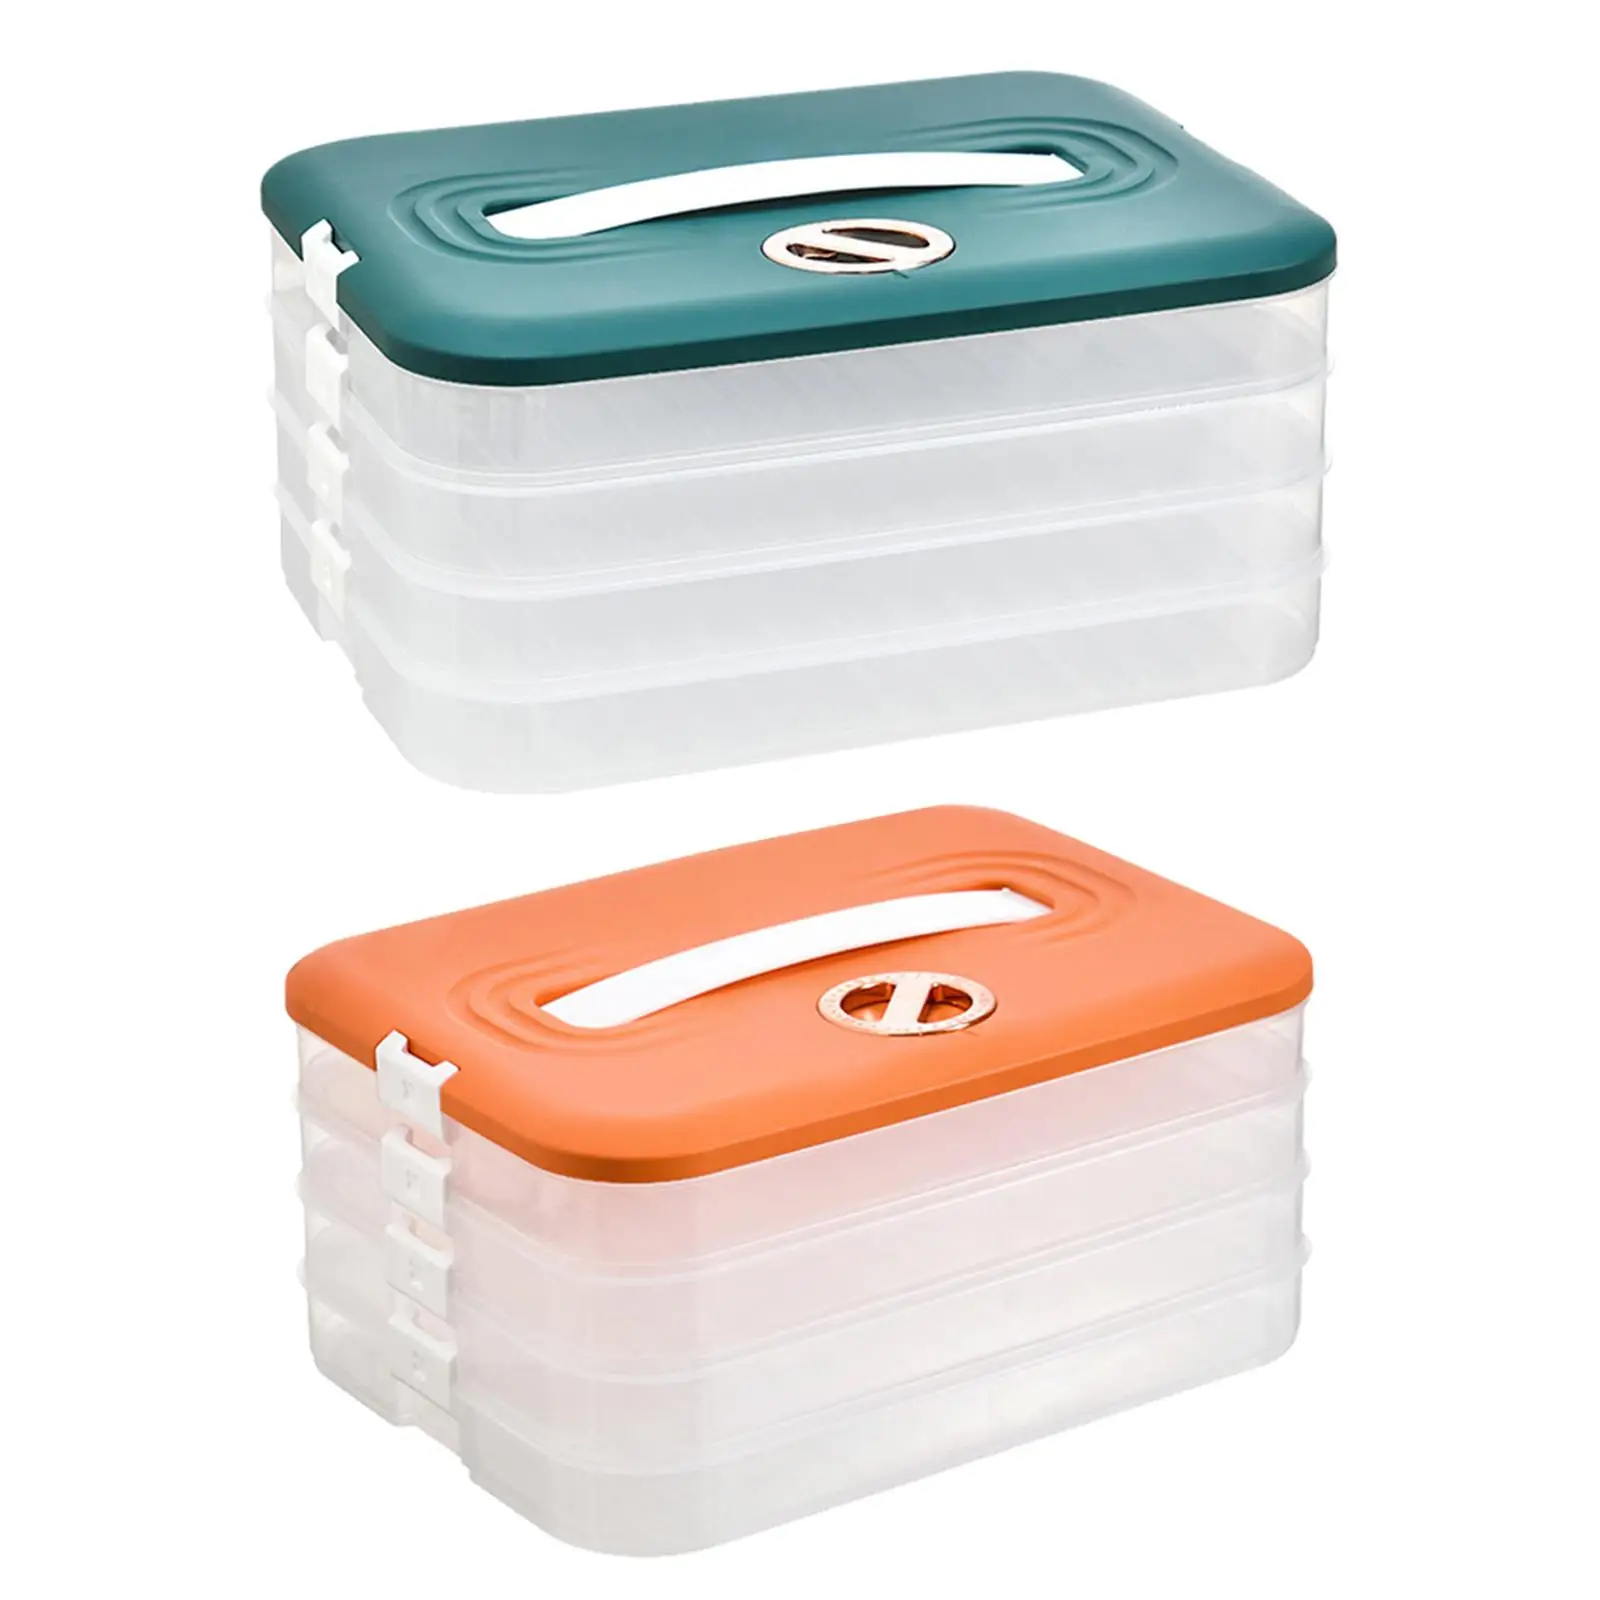 Large Storage Container for , 4-layer Food Grade Food Containers, Leak-proof, Stackable for Fish Eggs